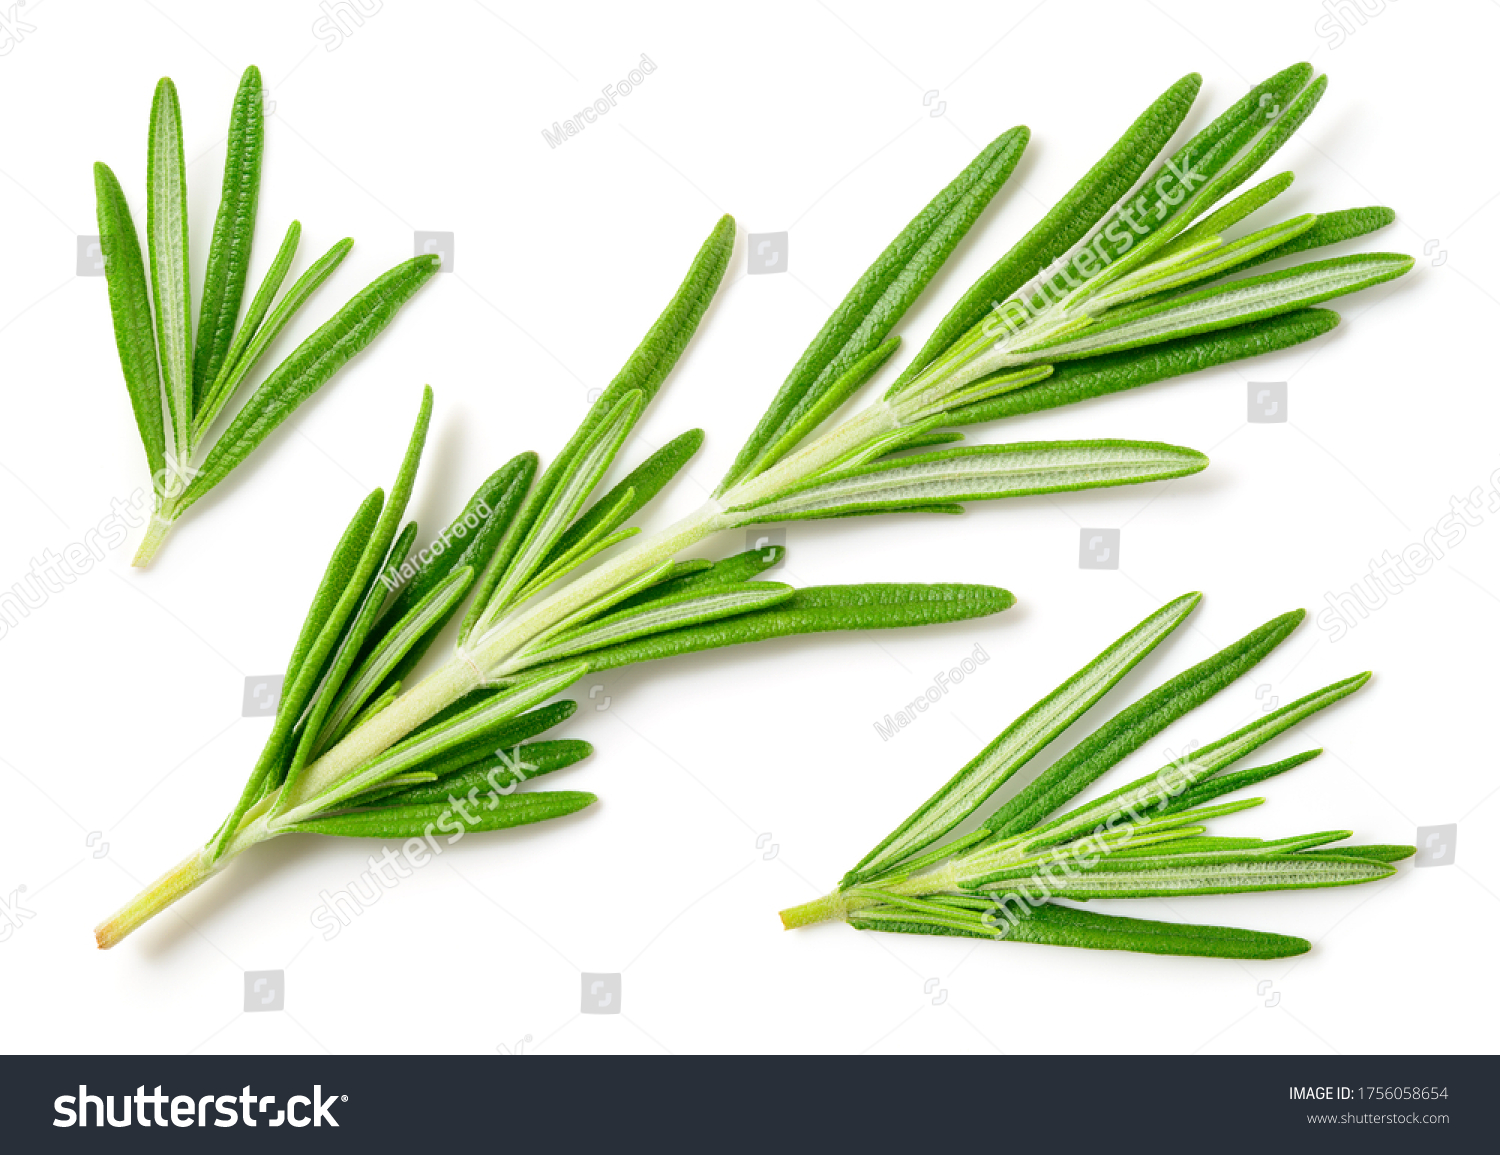 Rosemary isolated on white background. Top view rosemary twig set. Green herbs isolated on white. #1756058654